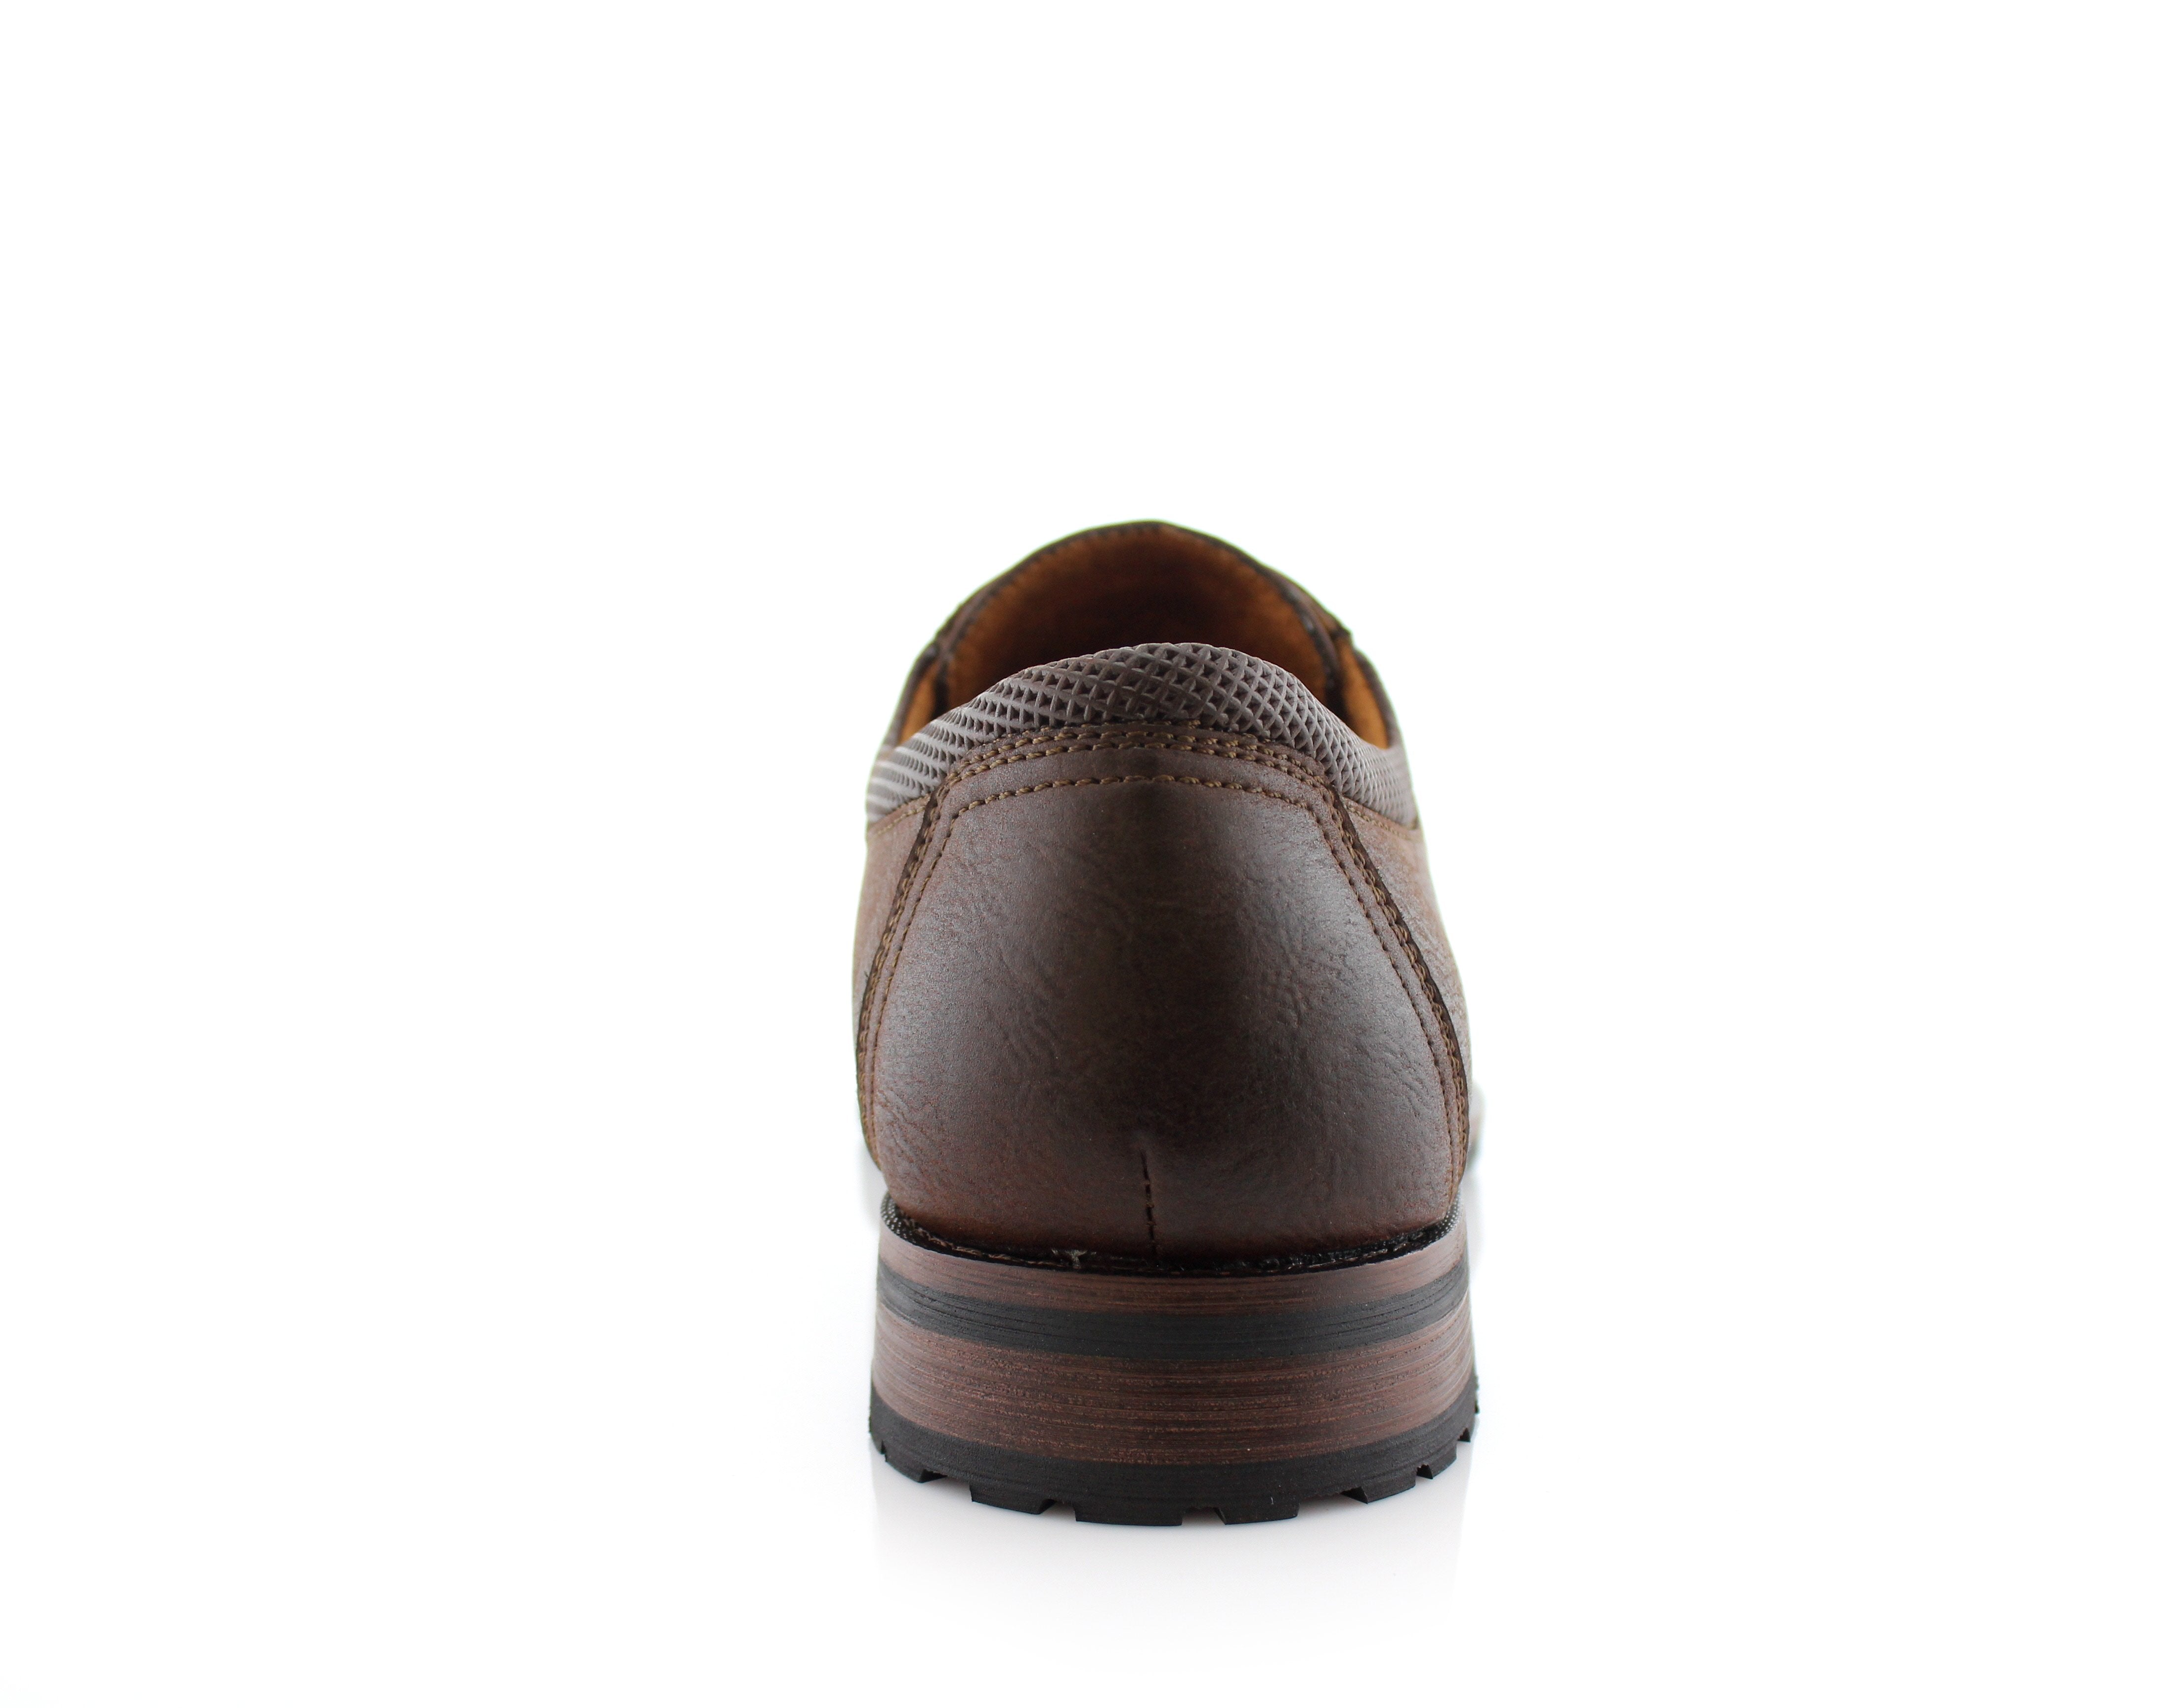 Duo-Textured Embossed Derby Shoes | Martin by Ferro Aldo | Conal Footwear | Back Angle View